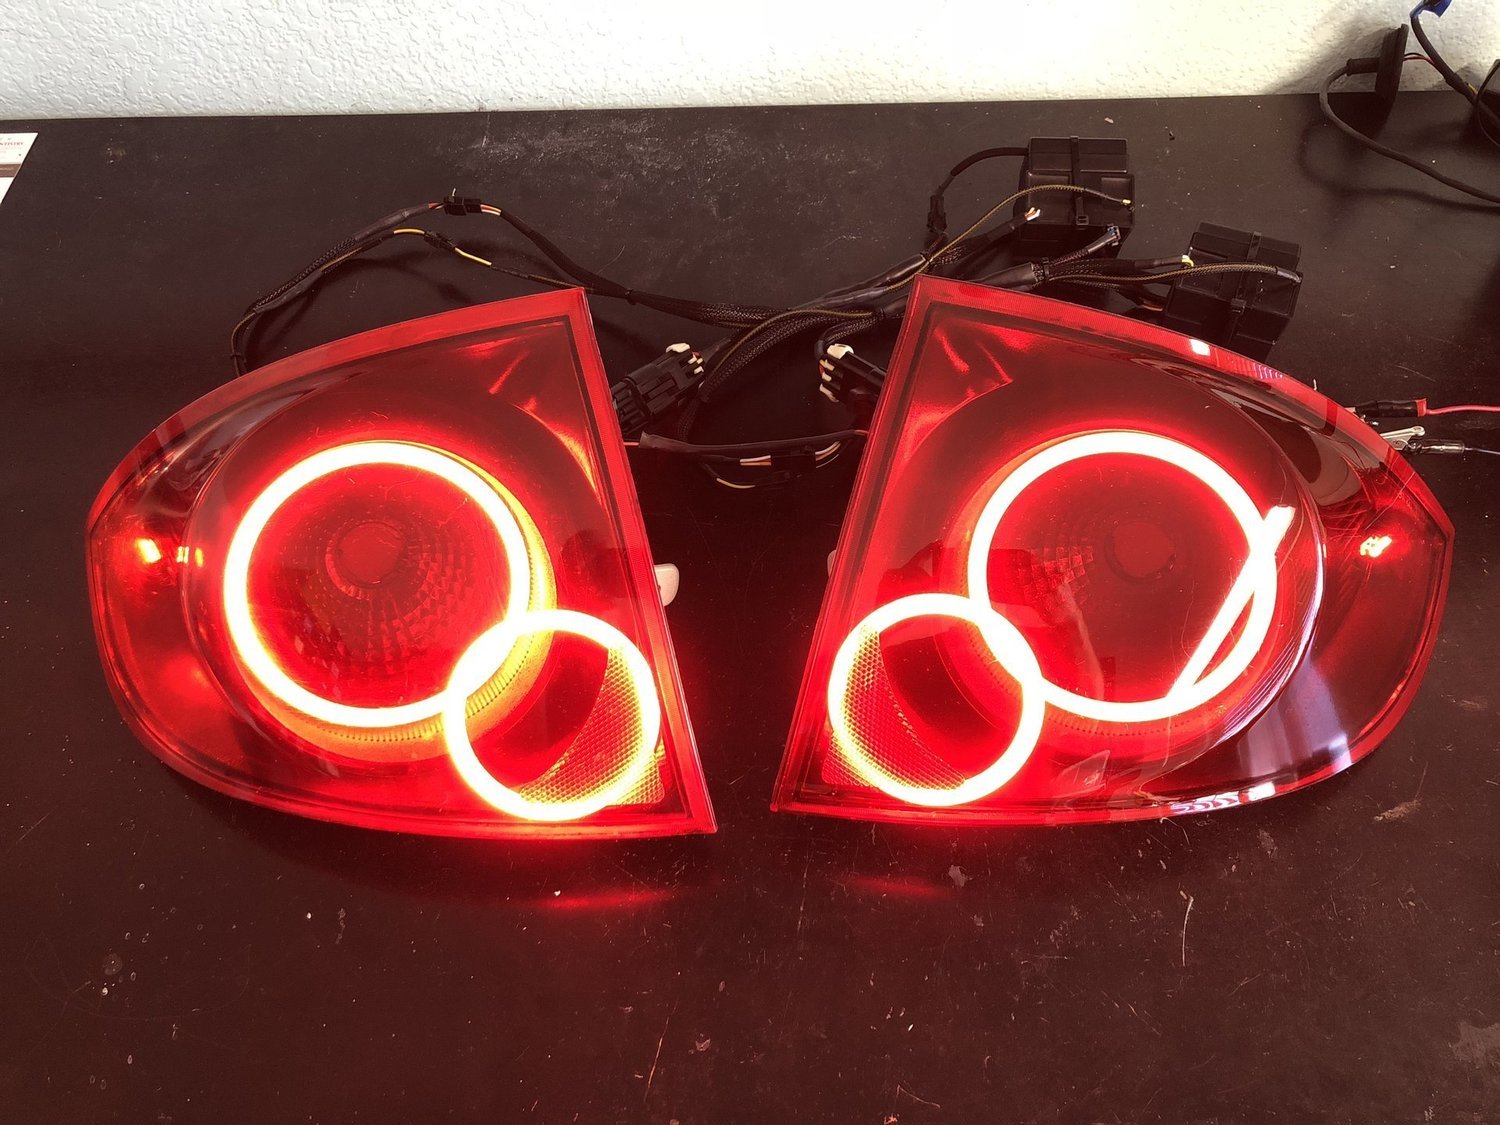 G5 coupe Halo style LED taillights, blacked out interiors, red lenses